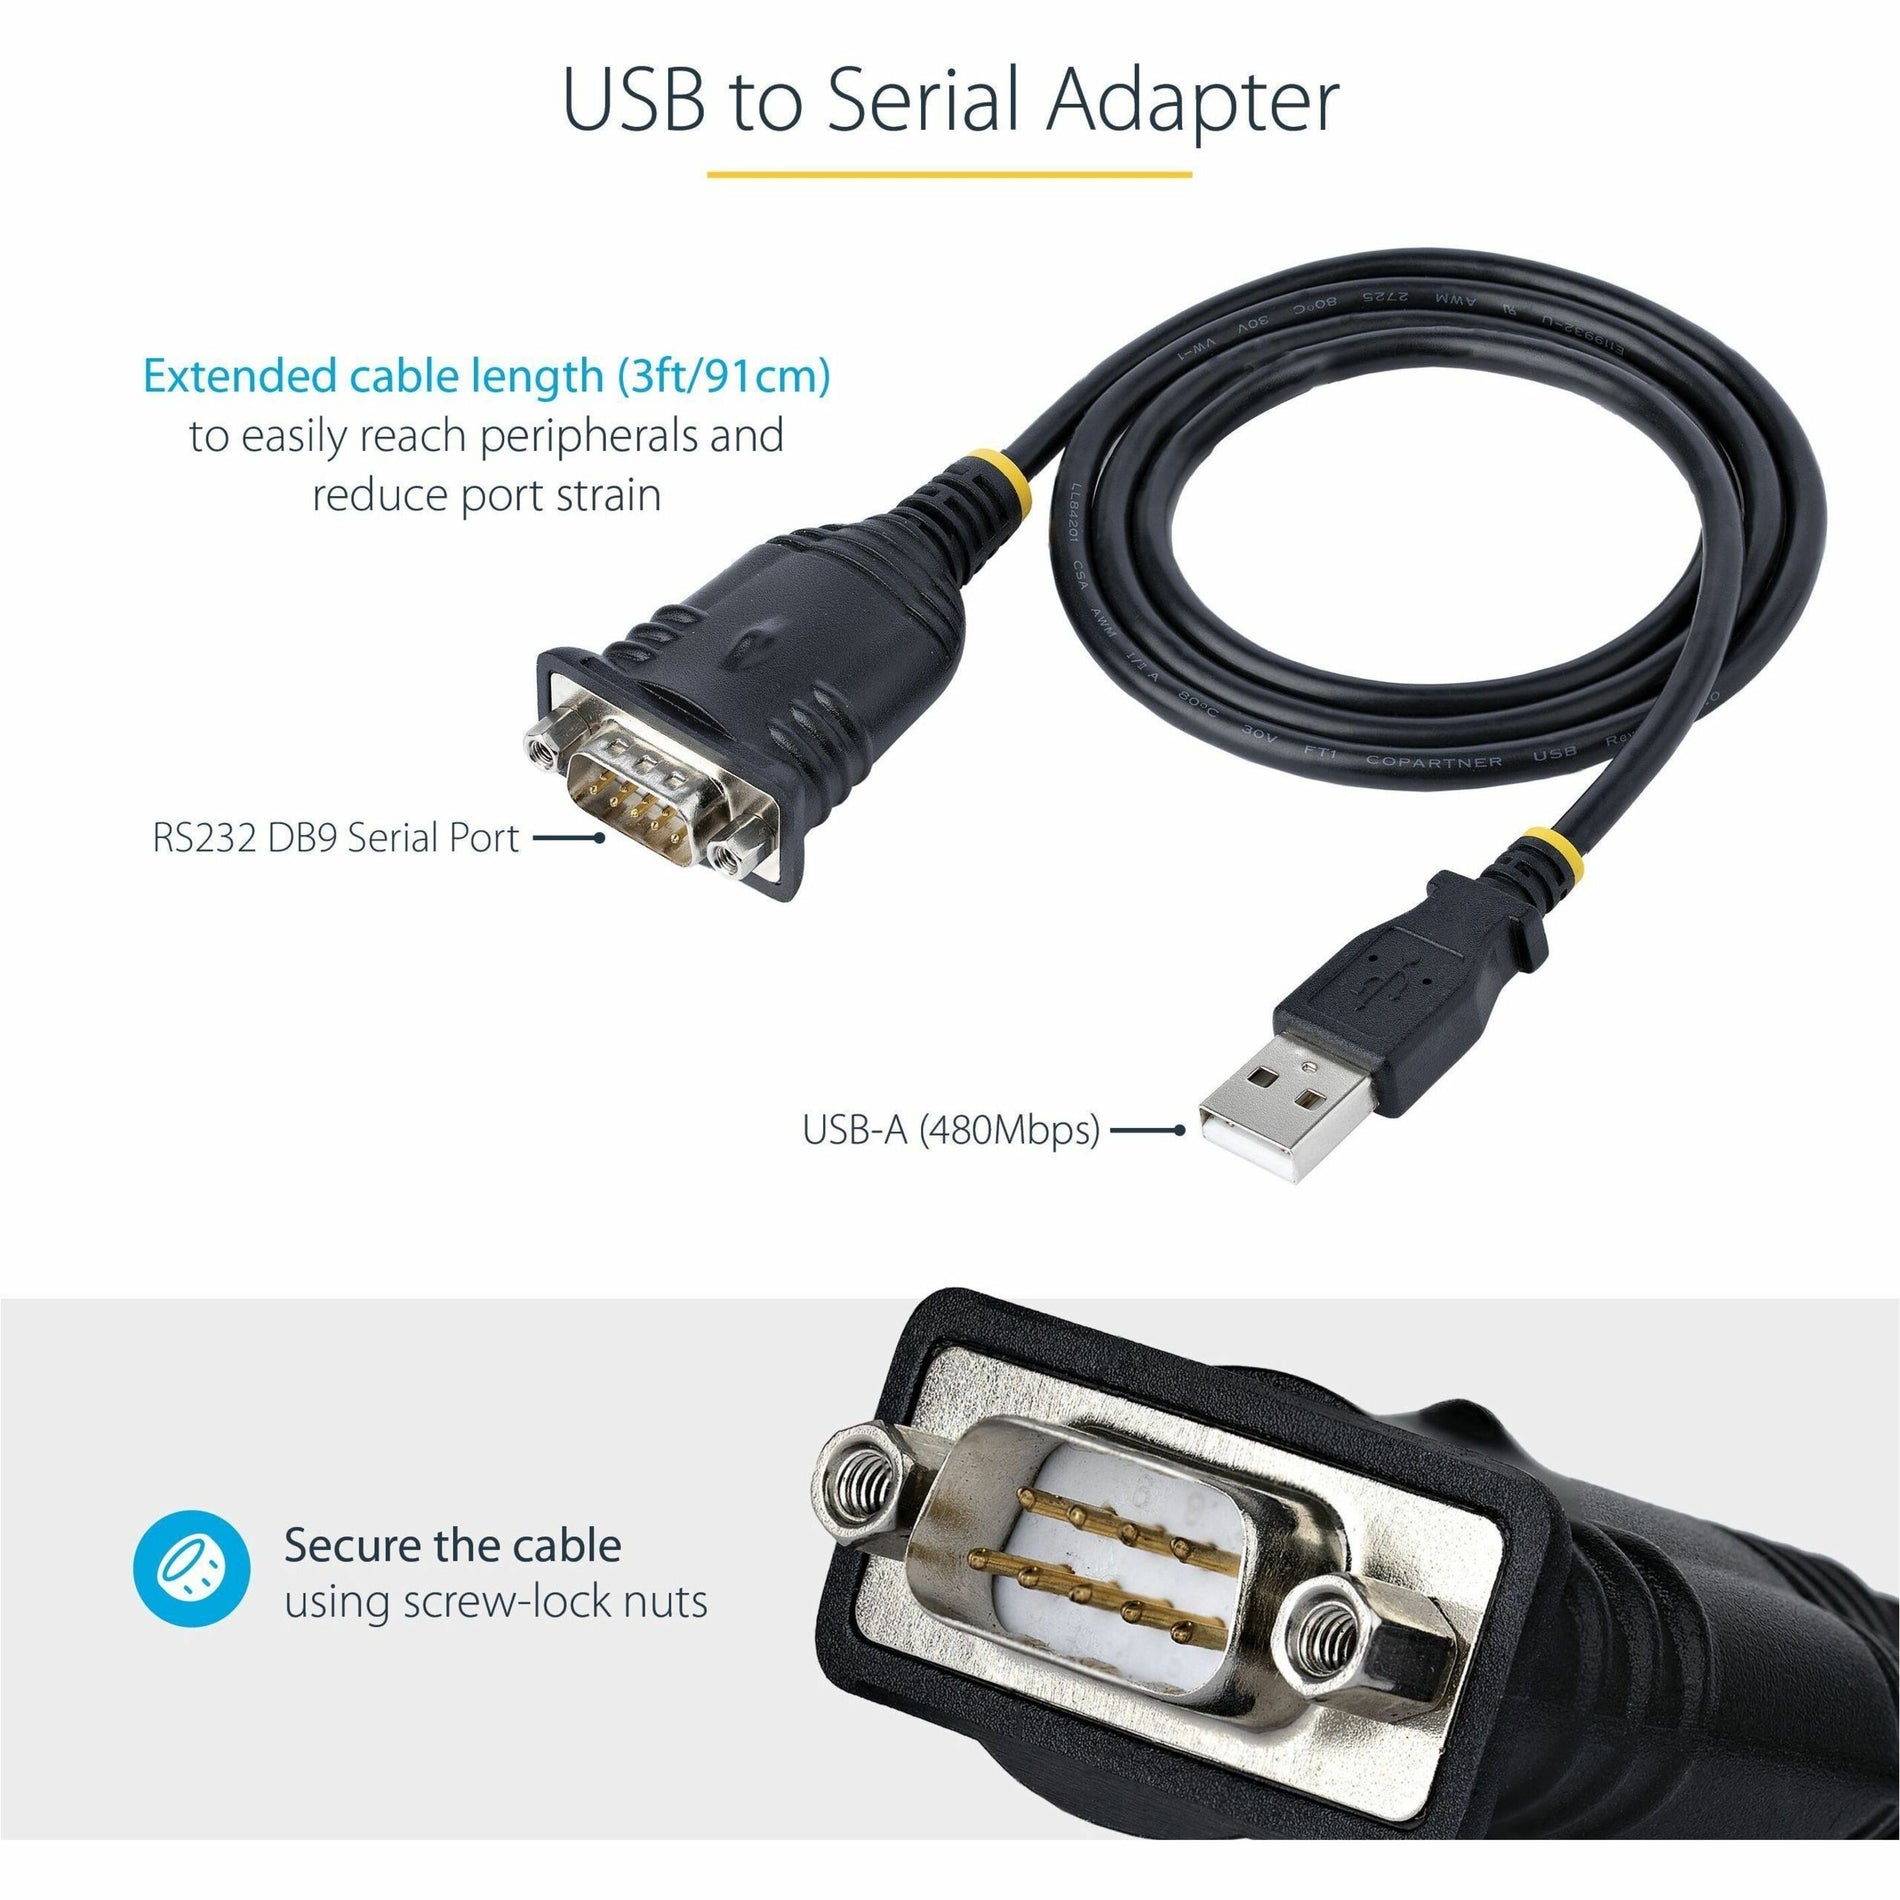 StarTech.com 1P3FP-USB-SERIAL USB to Serial Adapter, 3ft (1m) Cable, DB9 Male RS232 to USB Converter, COM Port Adapter with Prolific IC